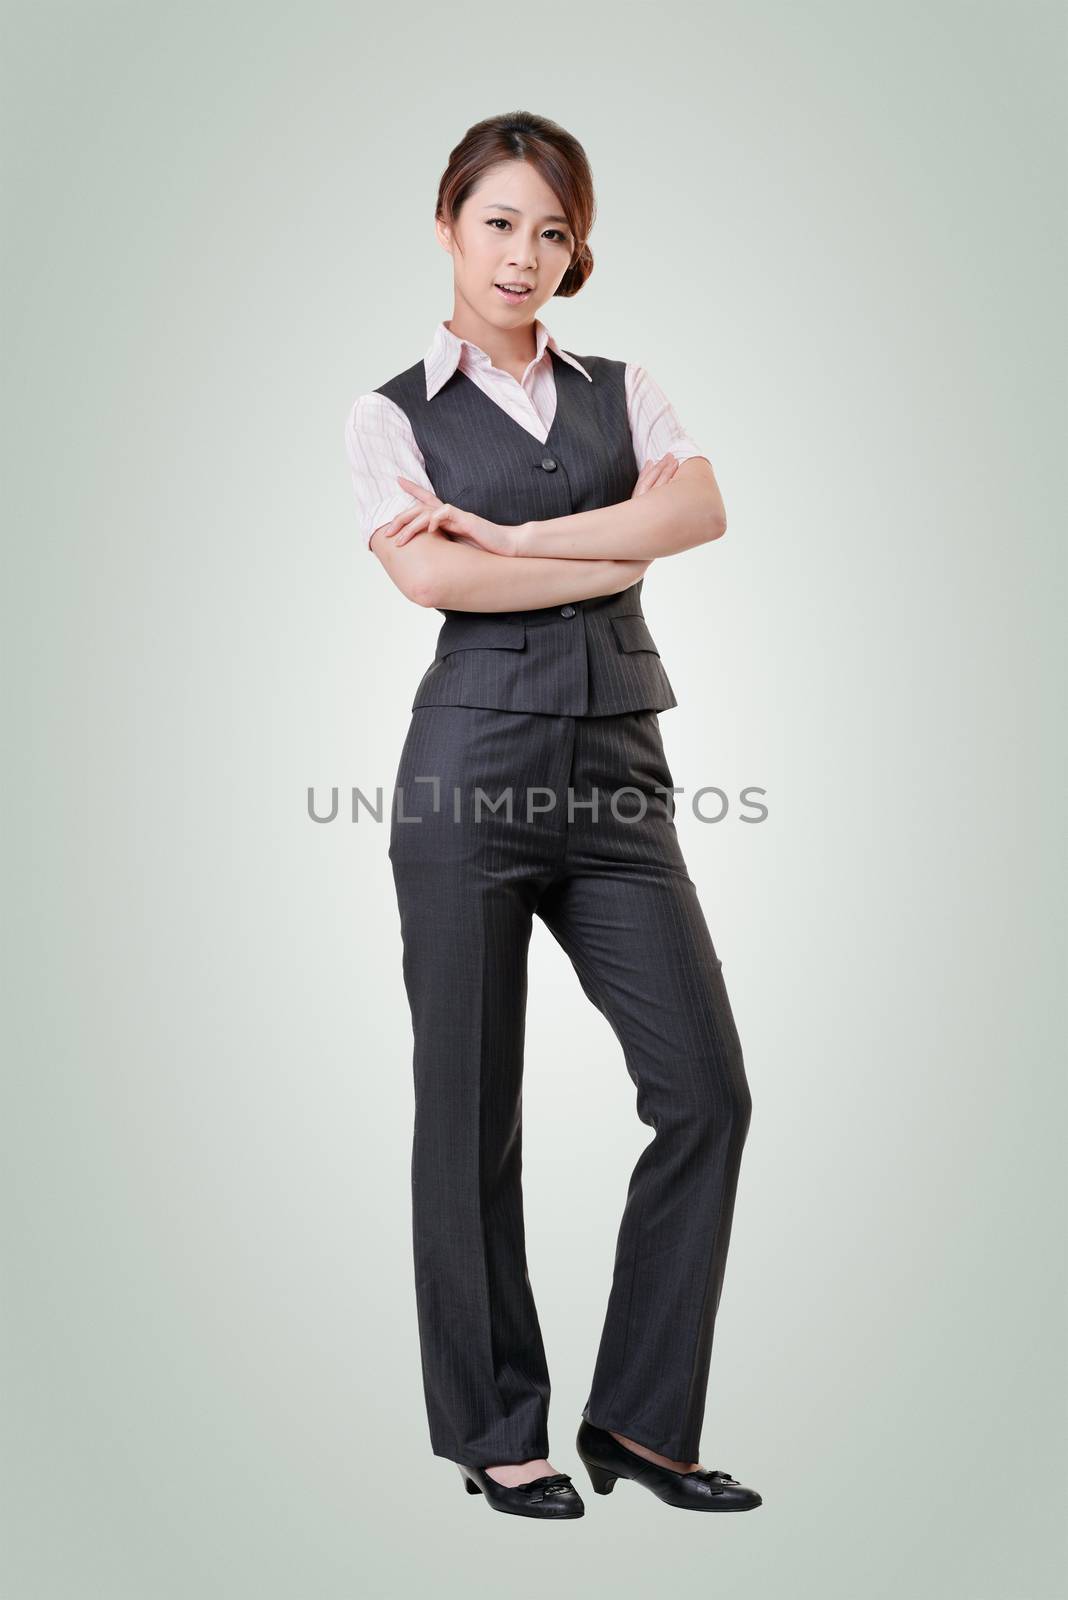 Asian business woman standing against studio background, full length portrait with clipping path.